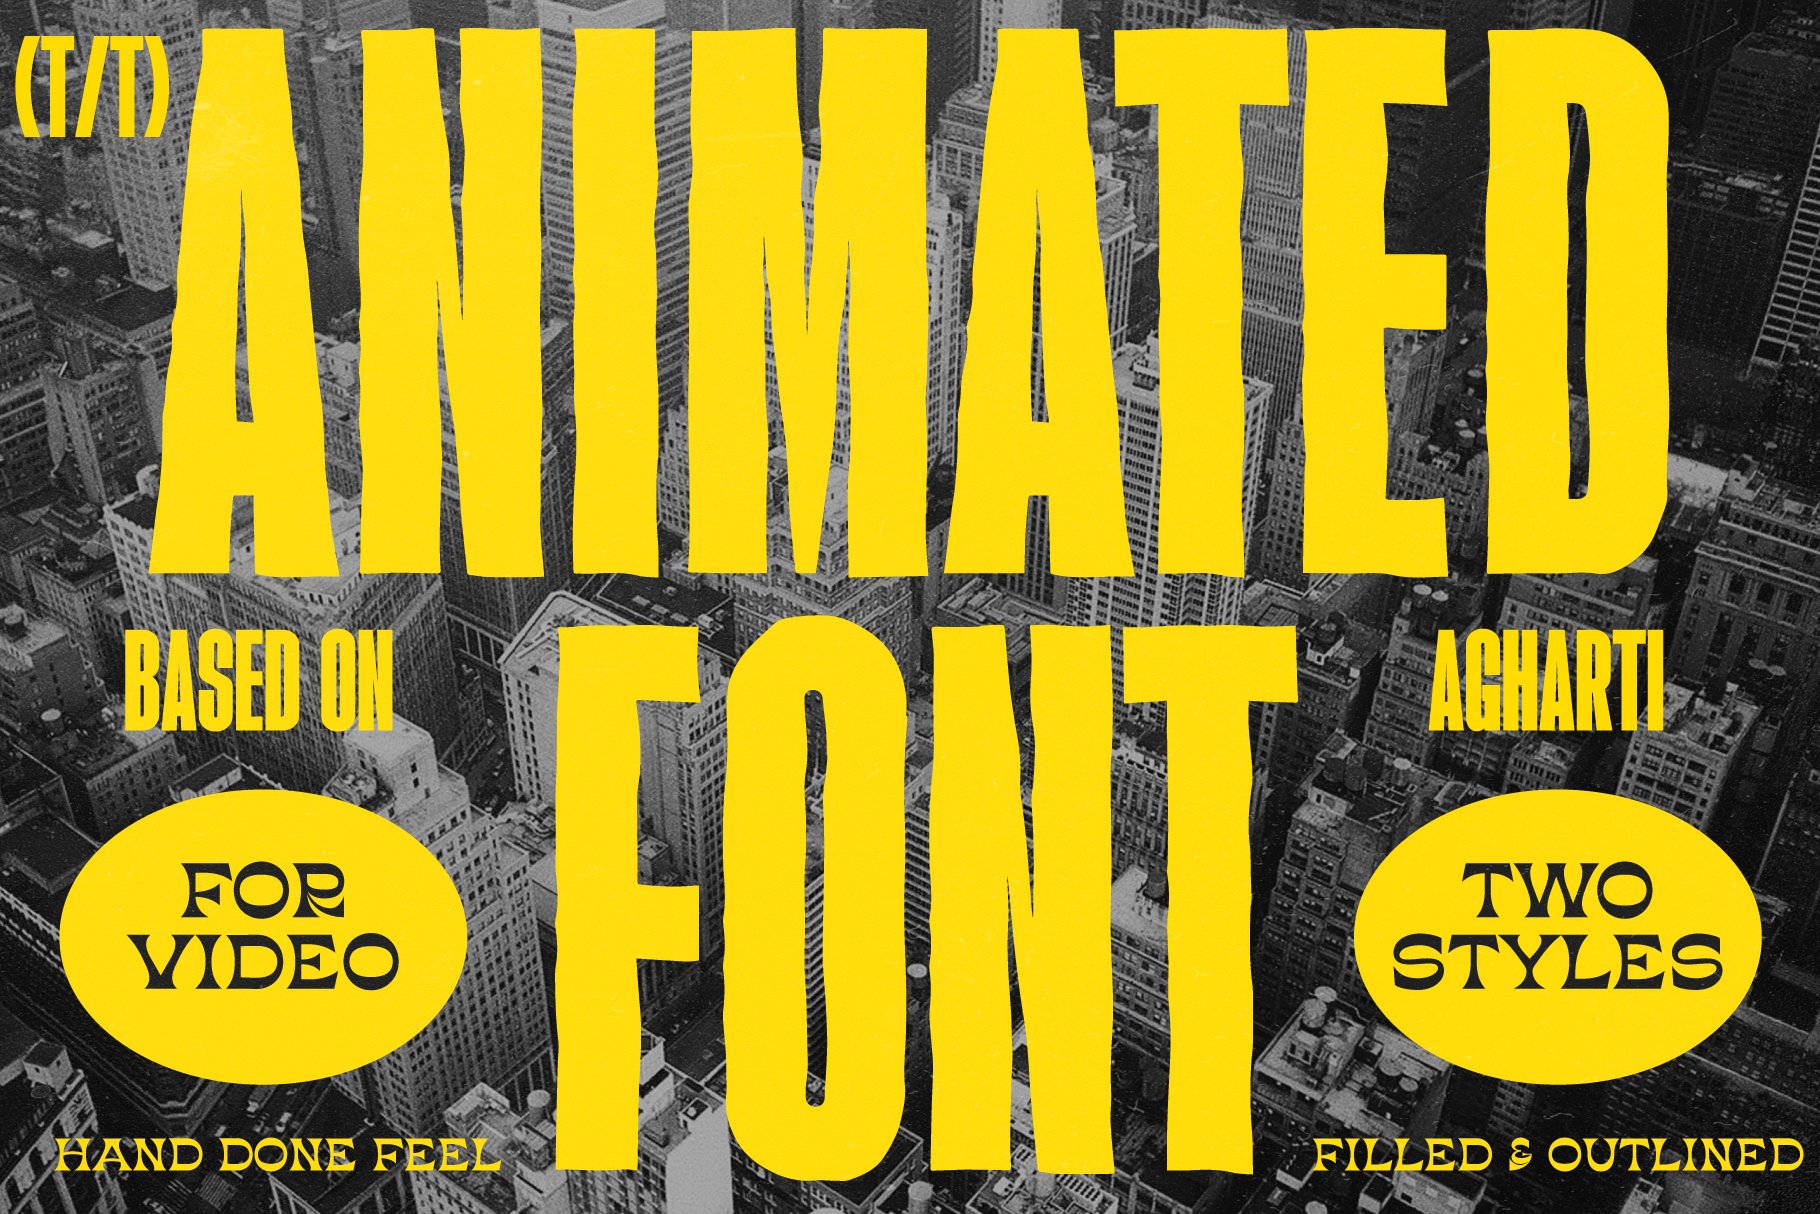 Animated Font Agharti cover image.